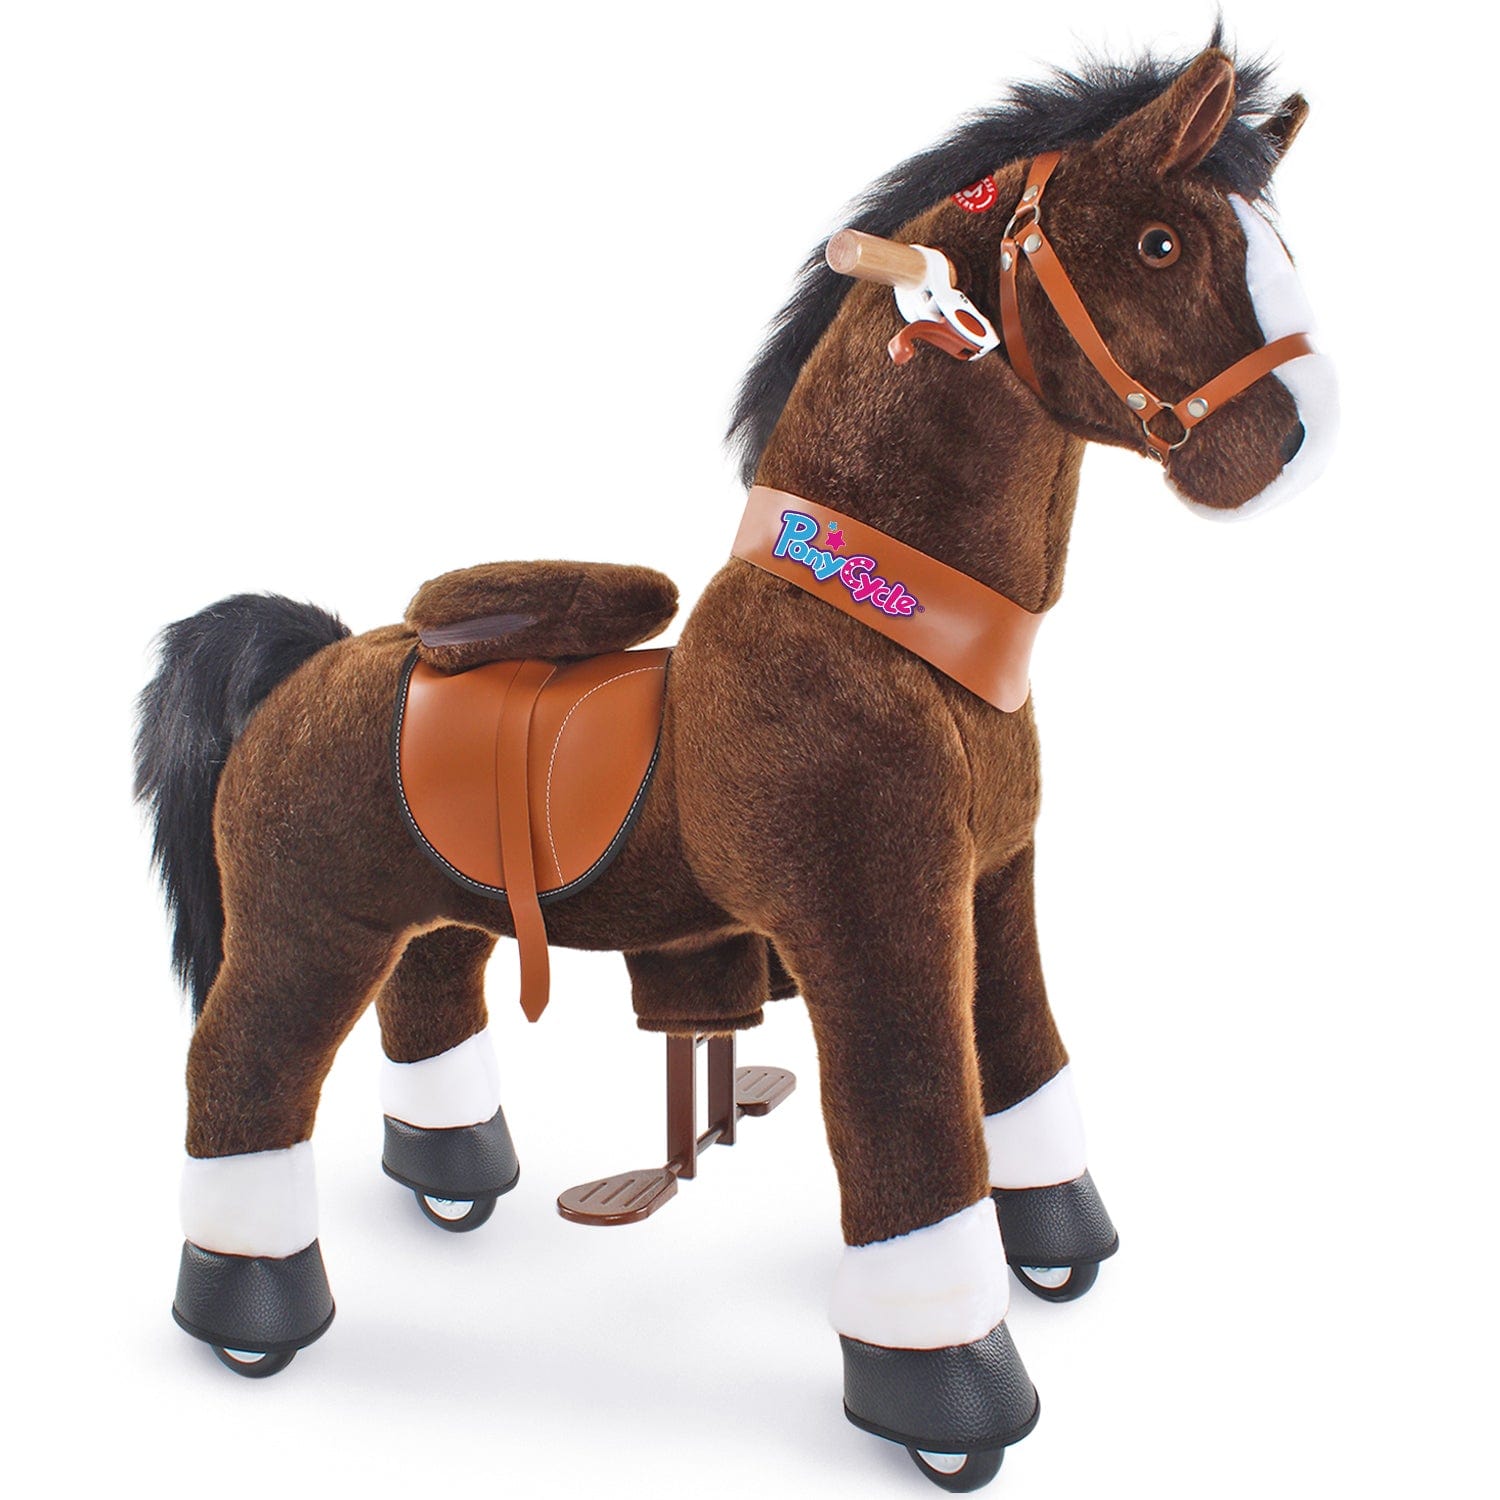 PonyCycle, Inc. ride on horse Chocolate / Size 3 for Age 3-5 Ride on Horse